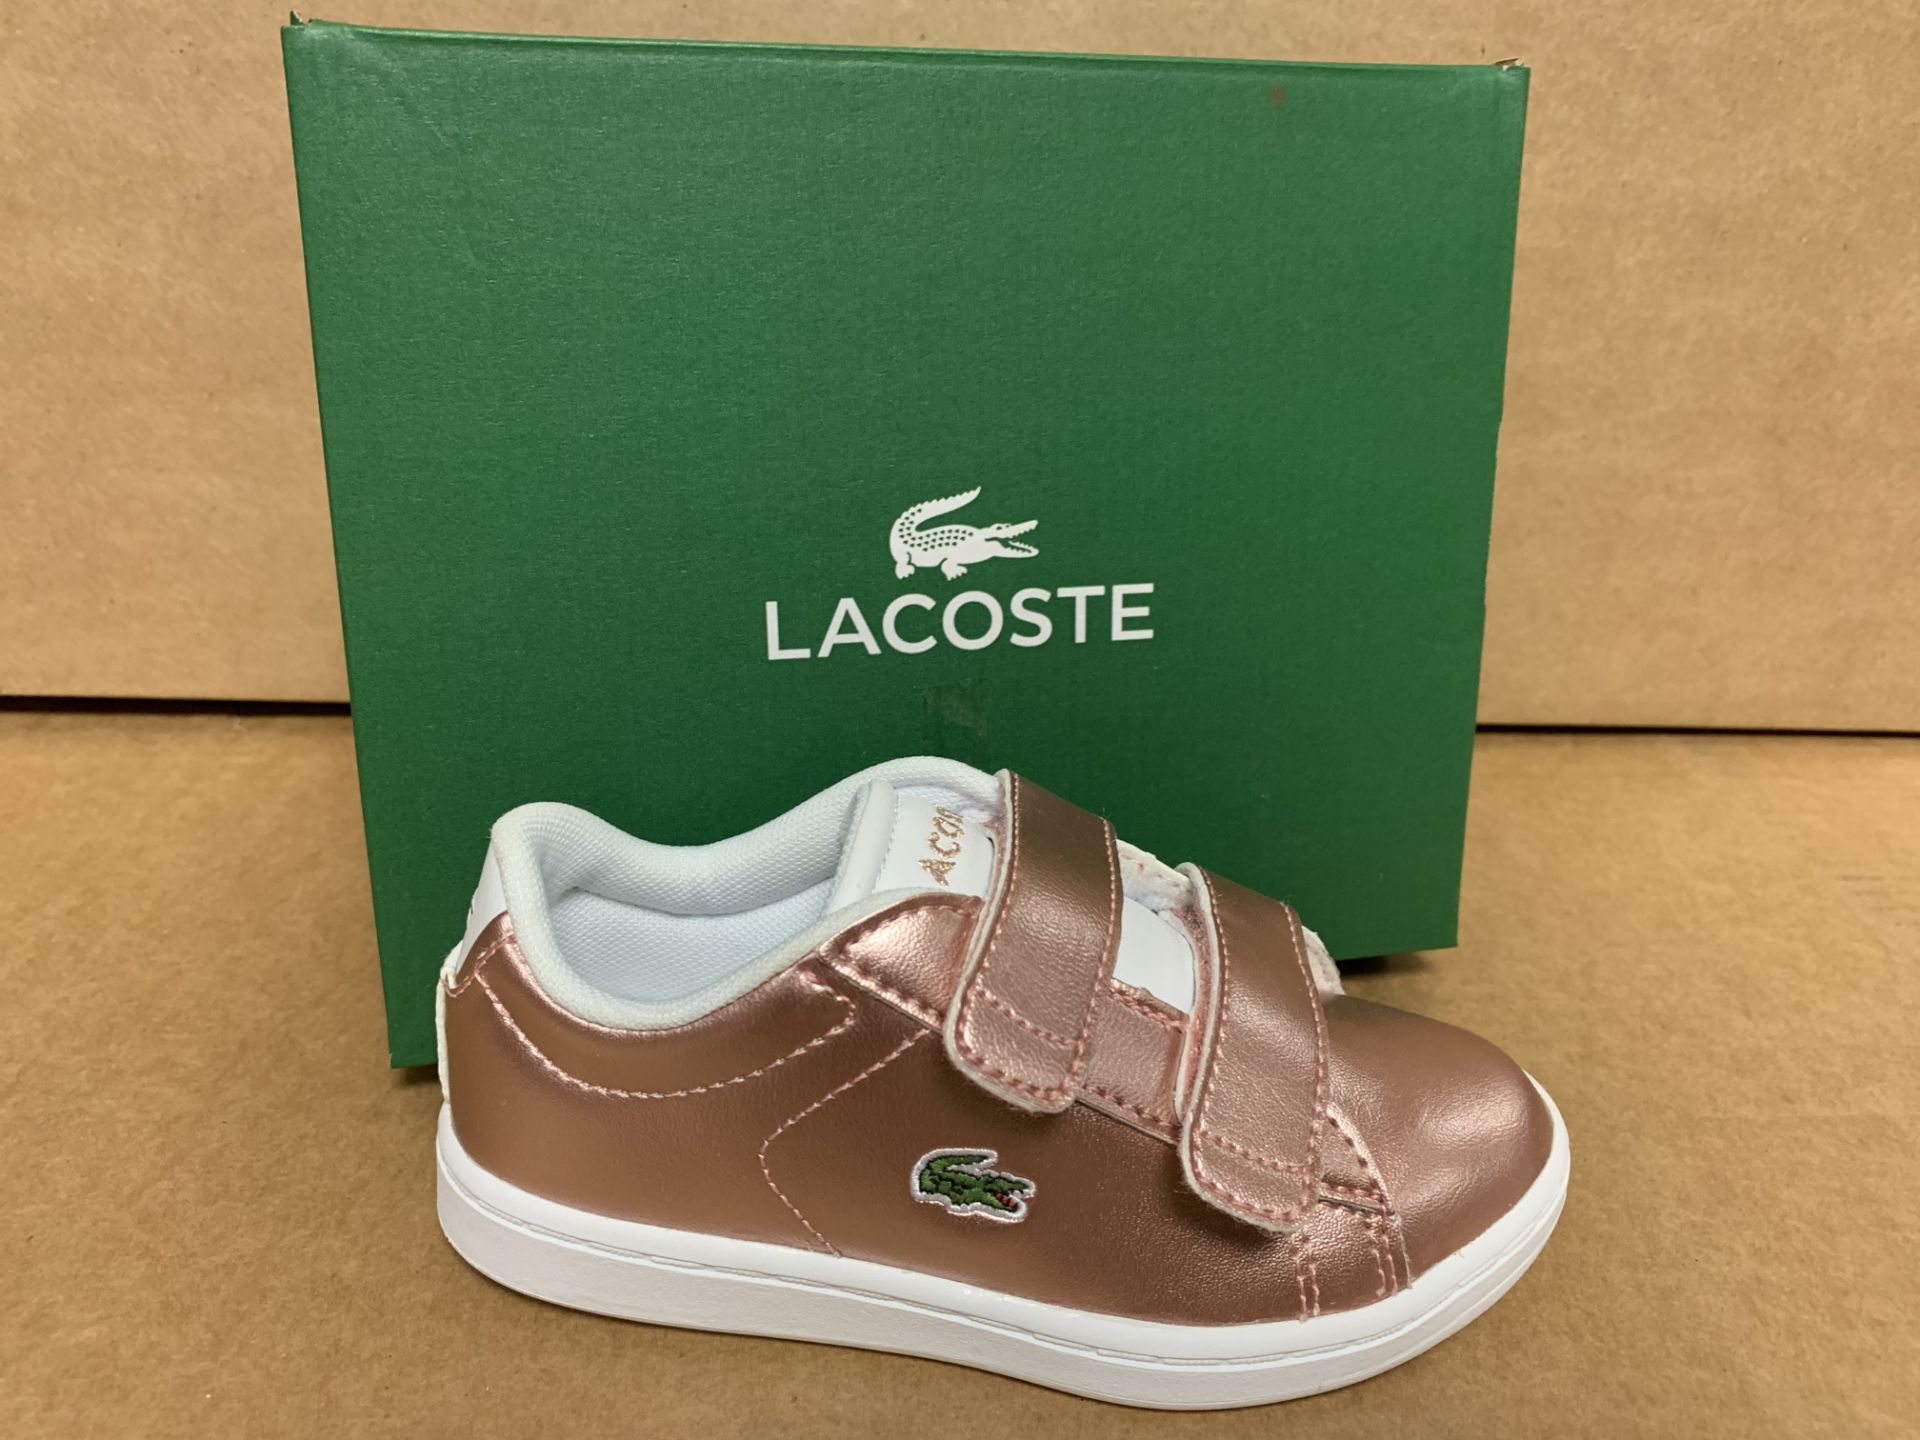 (NO VAT) 3 X BRAND NEW LACOSTE ROSE GOLD TRAINERS SIZE i8